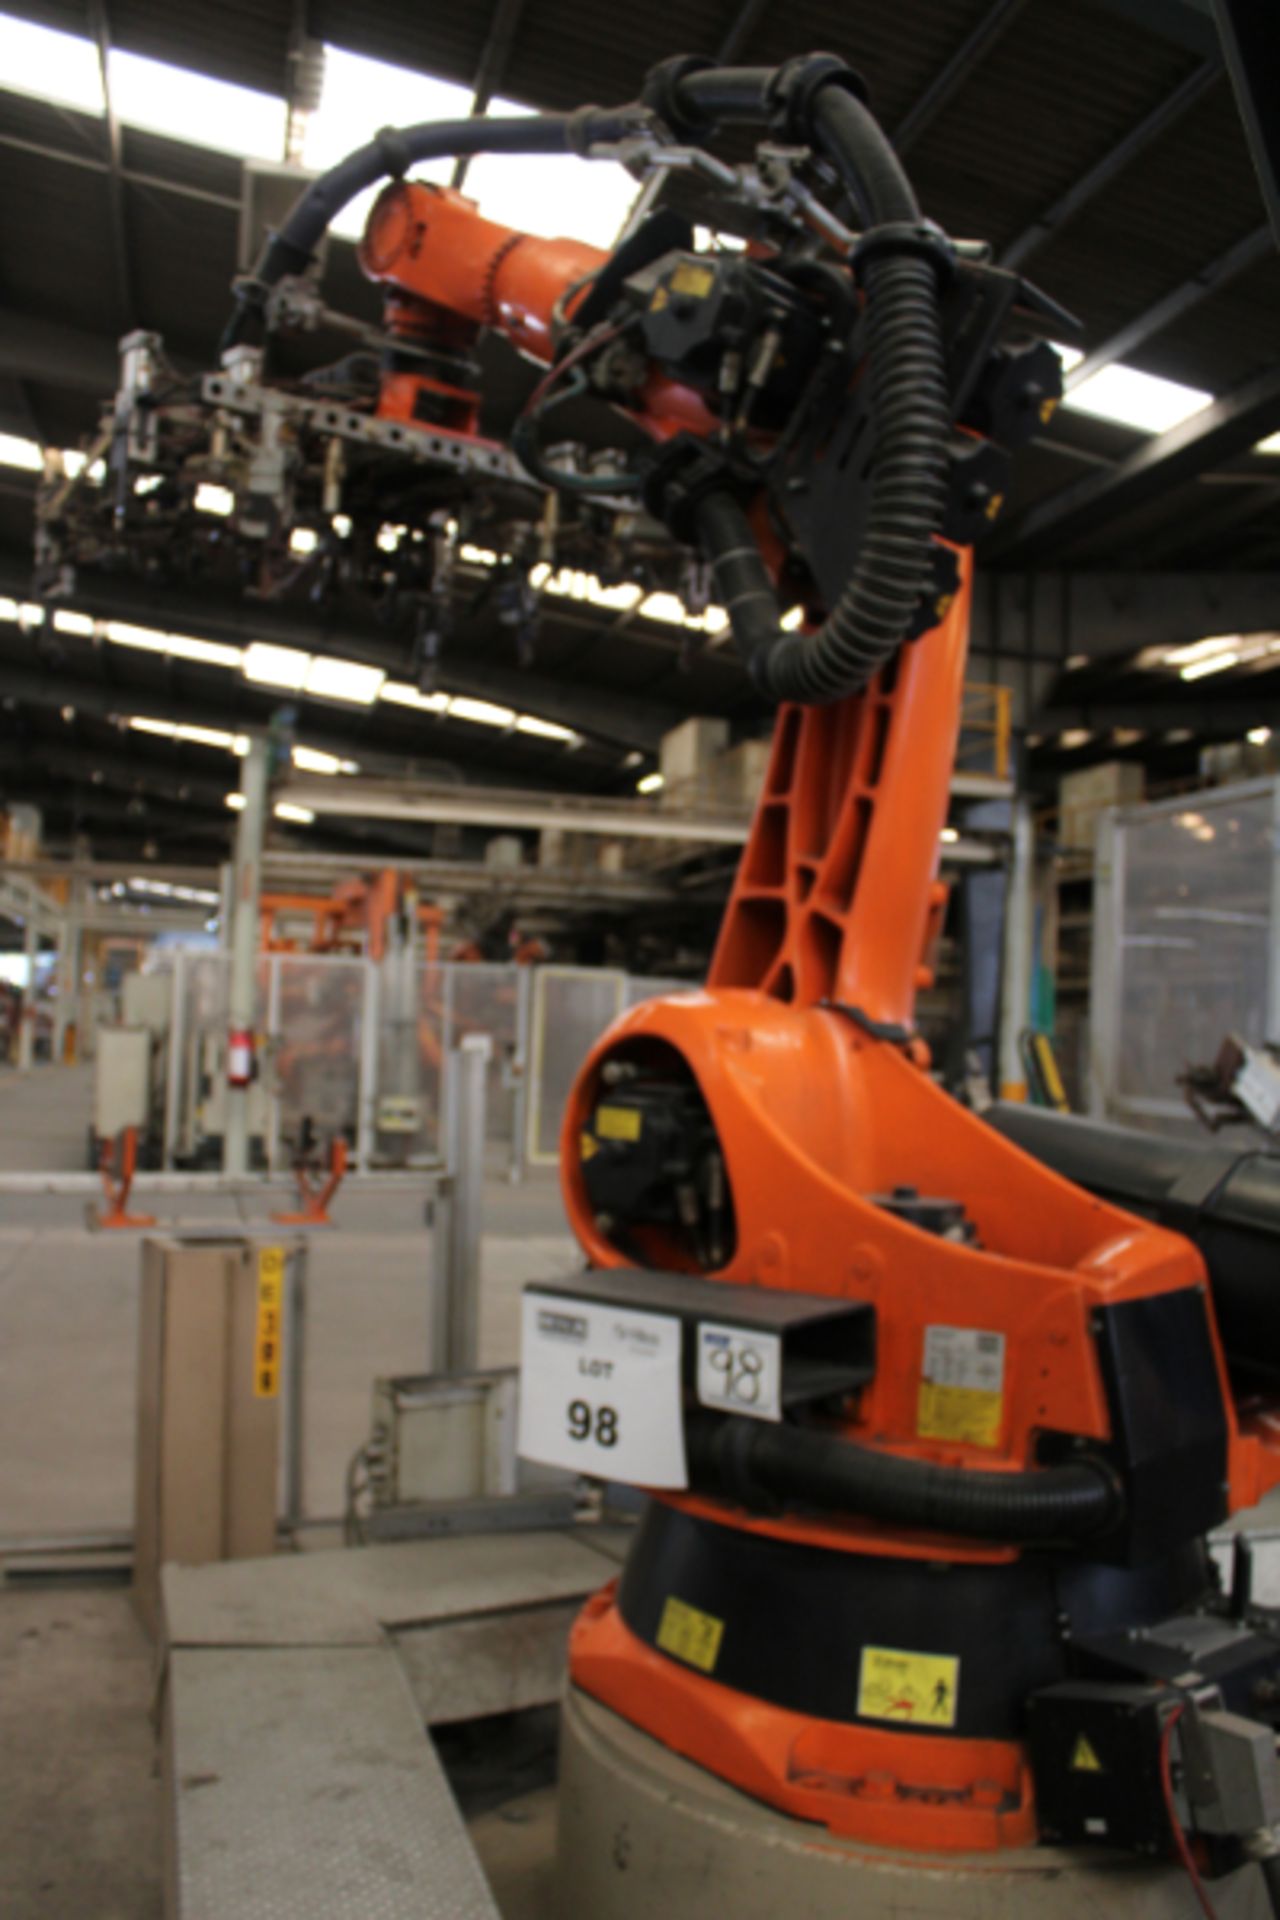 Kuka KR-180 Robot, Maximum Reach: 3,100 mm, Rated Payload: 180 Kg, with Robot Controller, New 2003 - Image 4 of 6